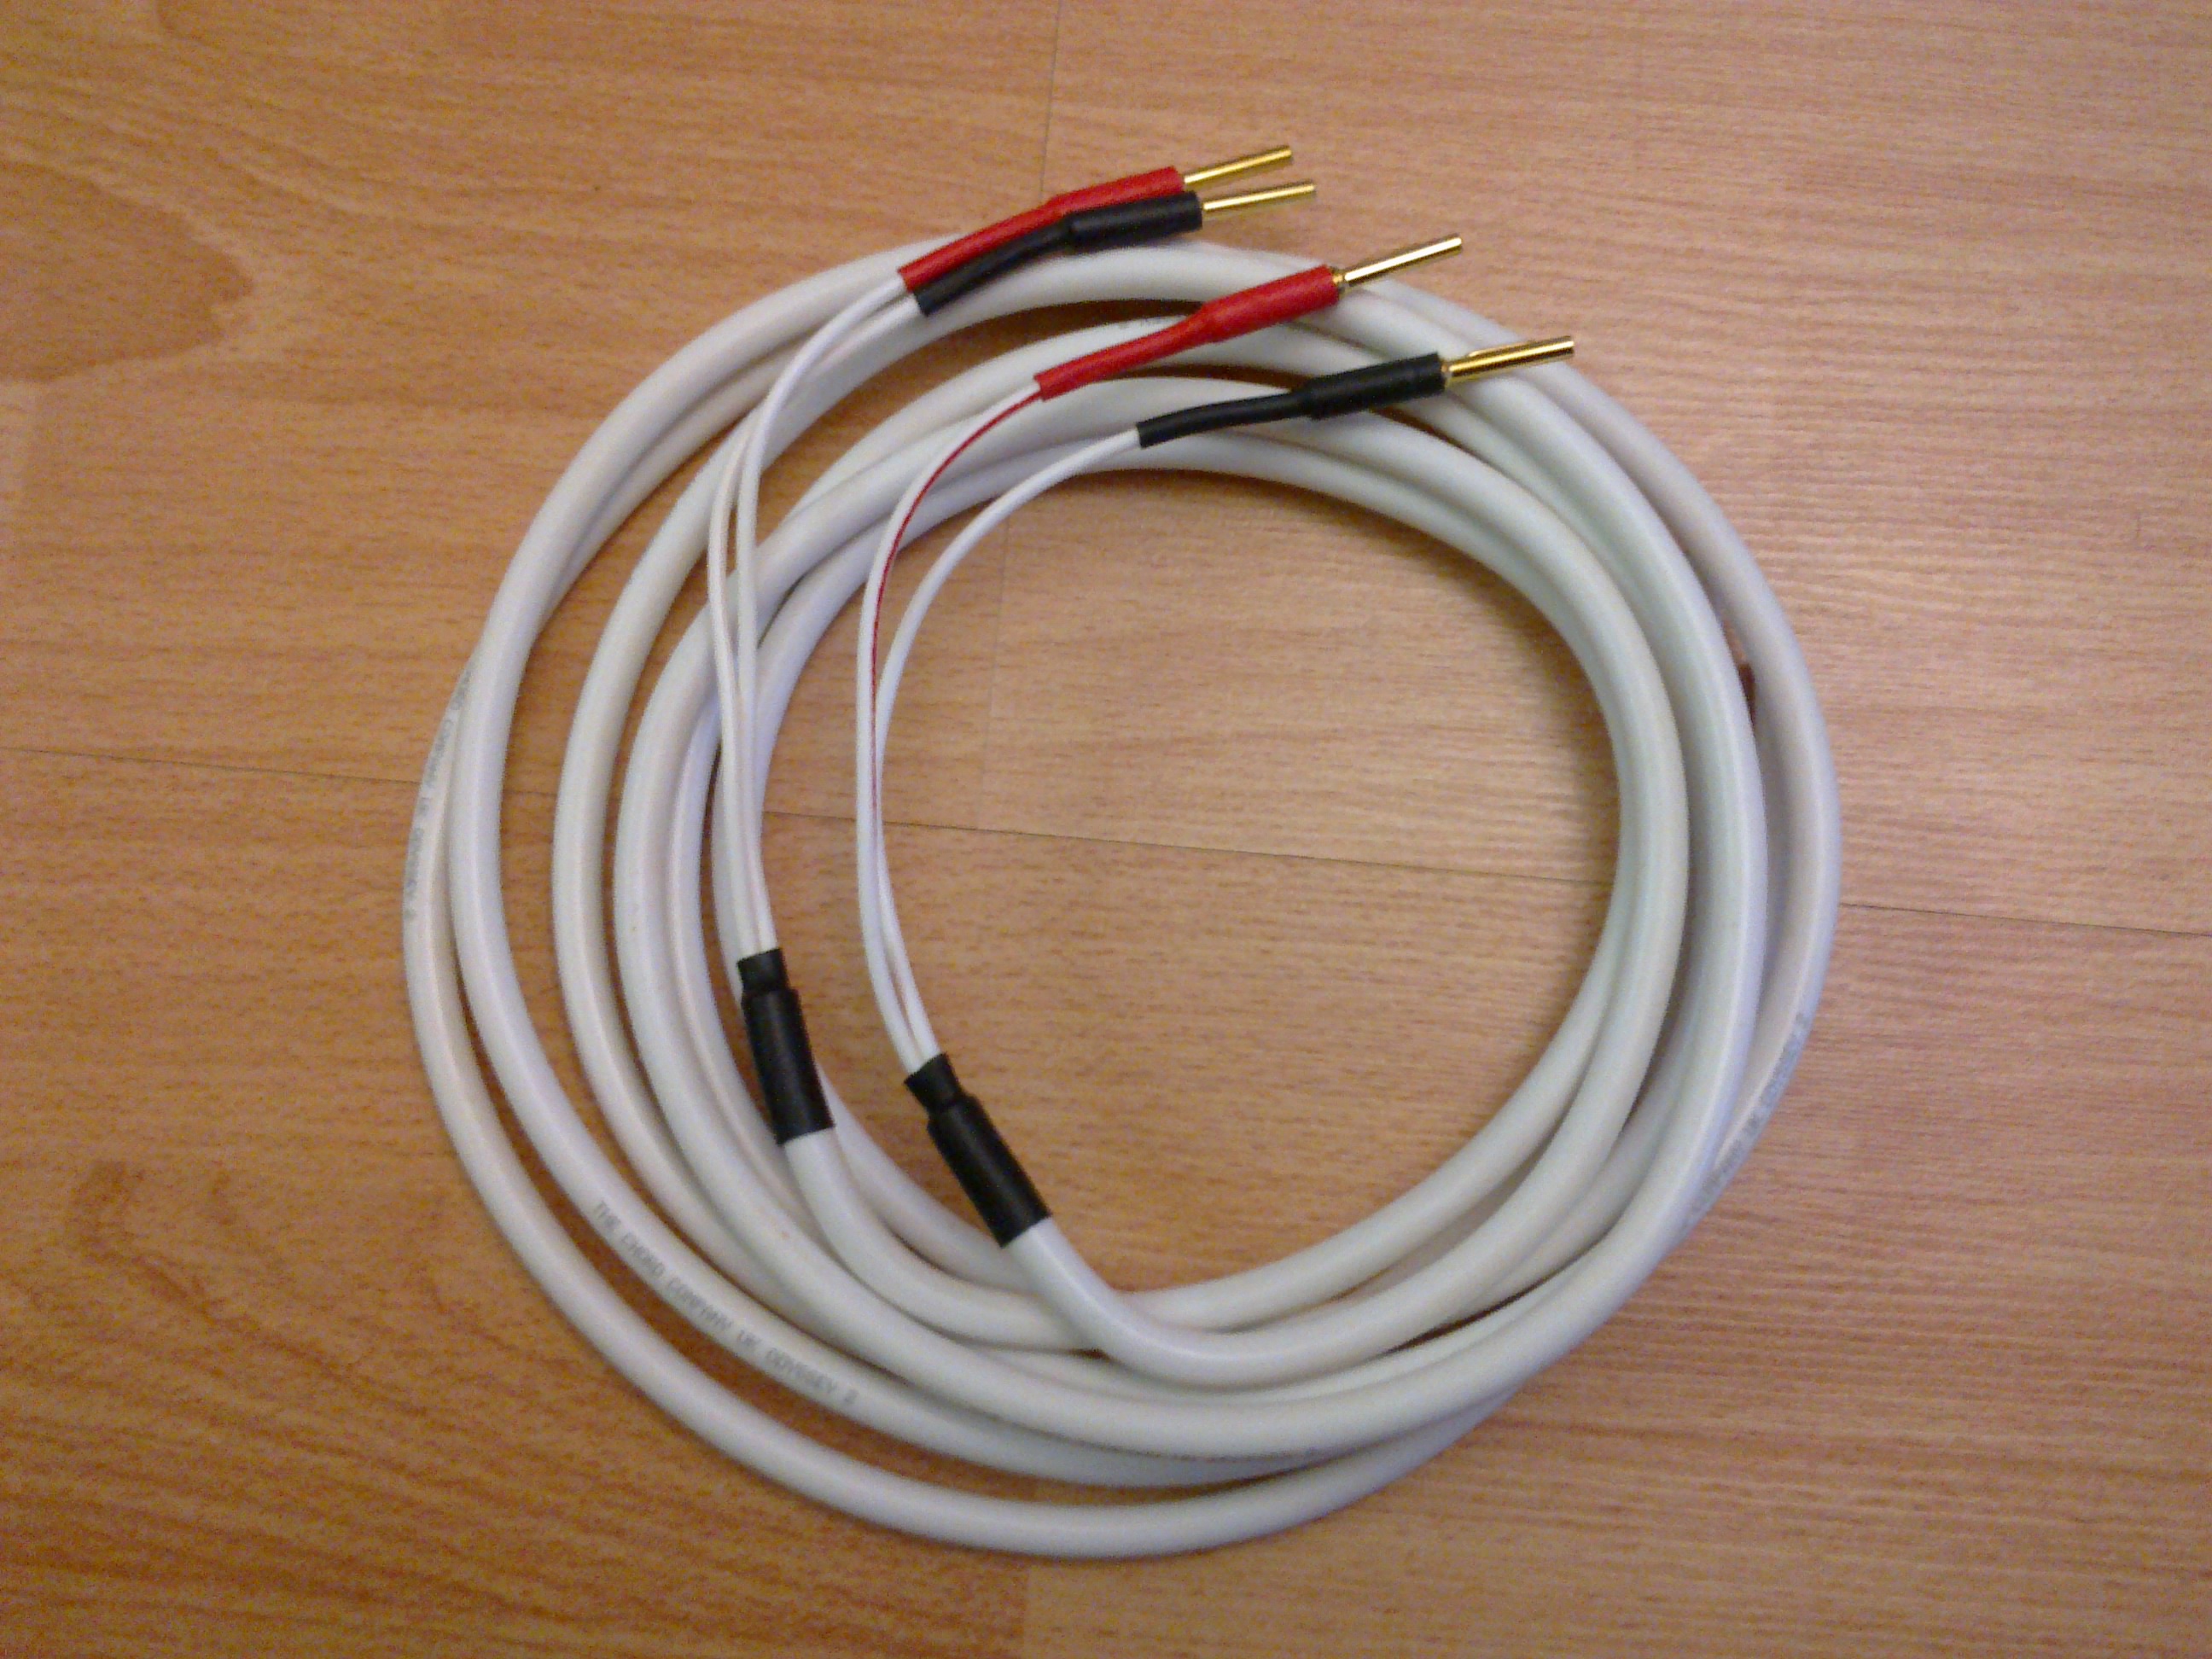  CHORD Carnival Silverscreen Speaker Cable